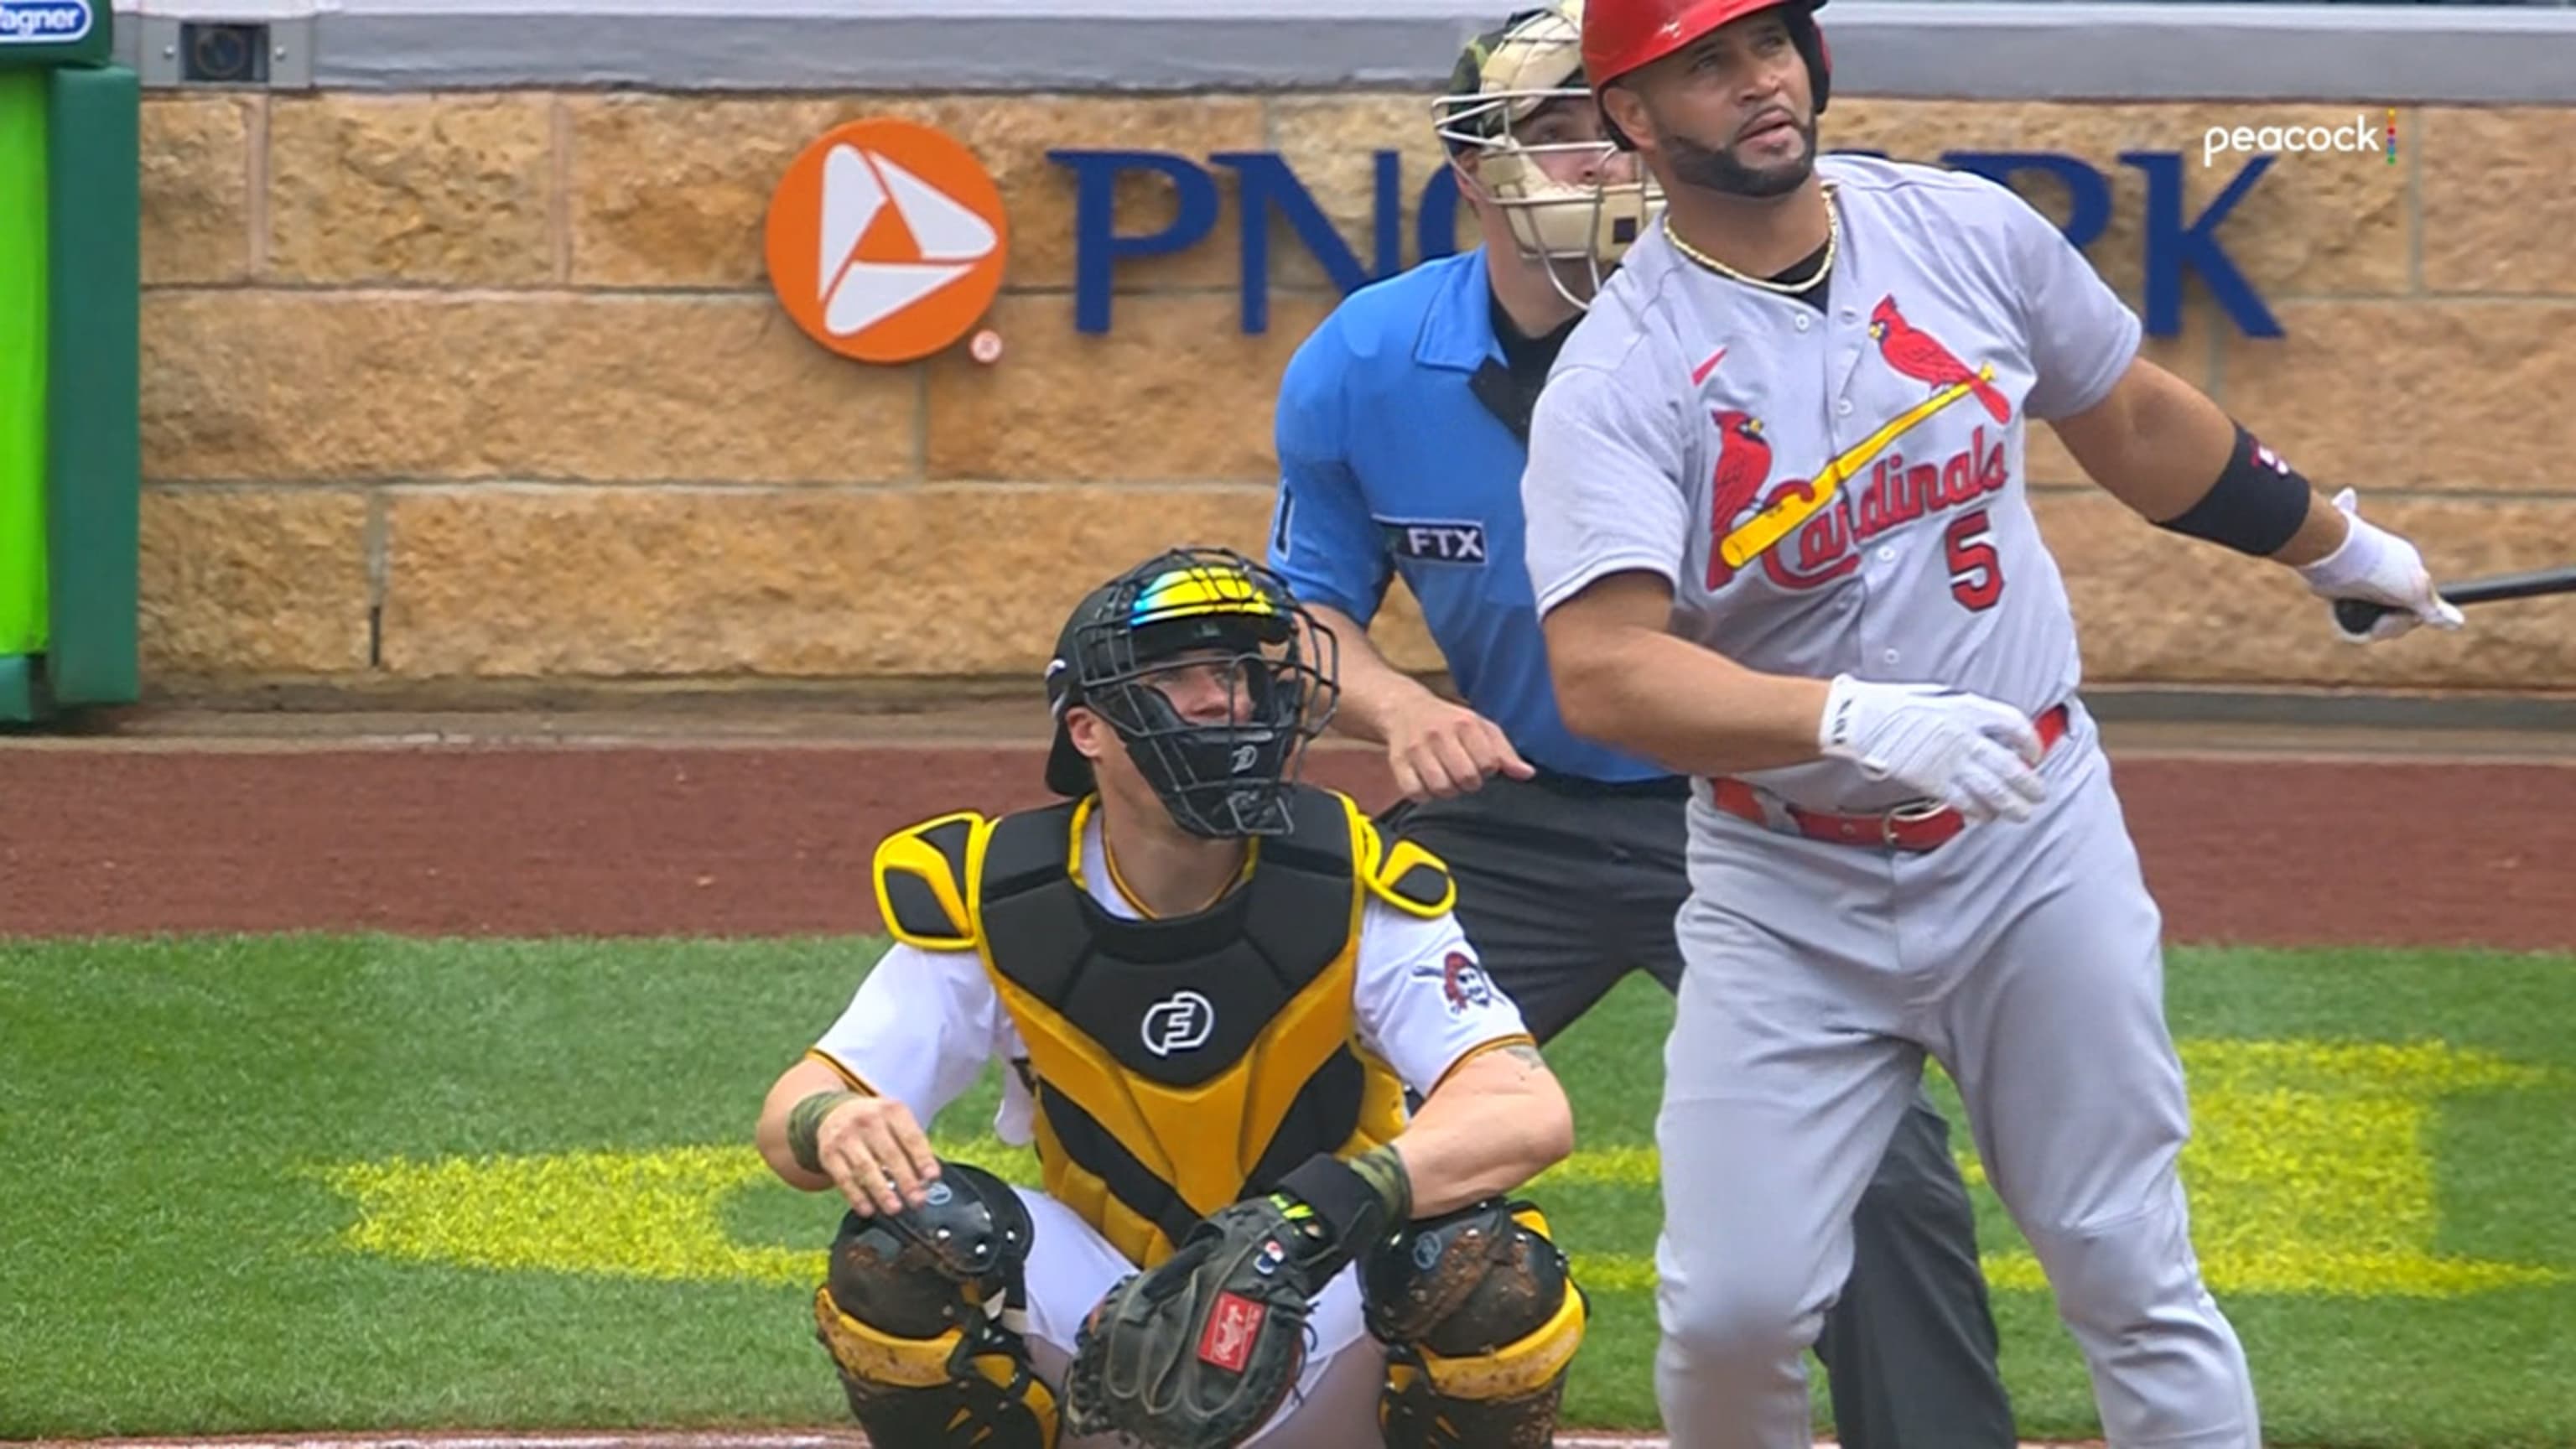 Yadier Molina PITCHES the entire 9th inning for the Cardinals! (Pujols  helps him warm up!) 